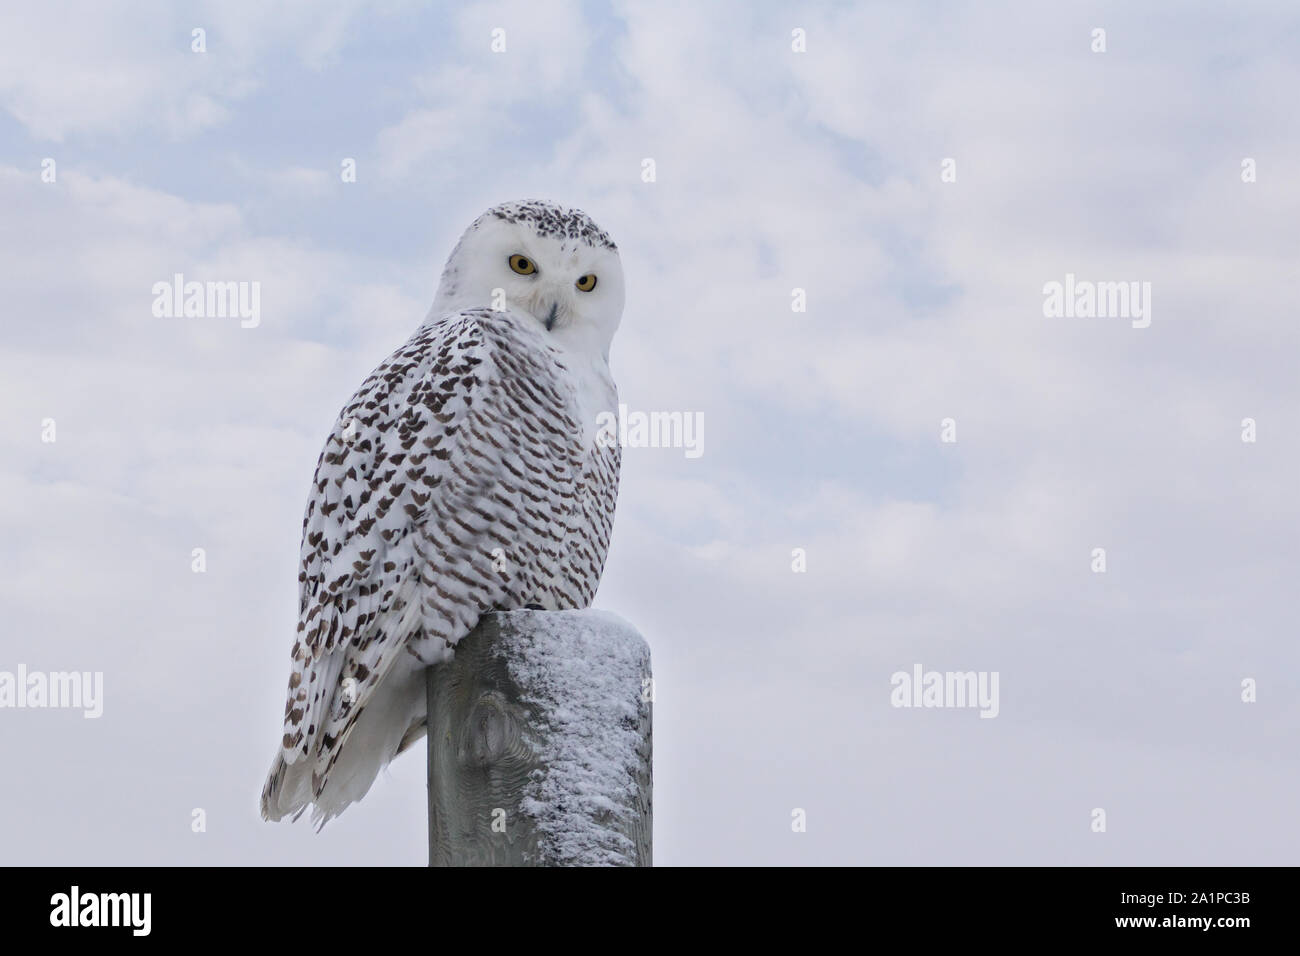 Close up of staring Snowy Owl on post against white clouds in blue sky Stock Photo